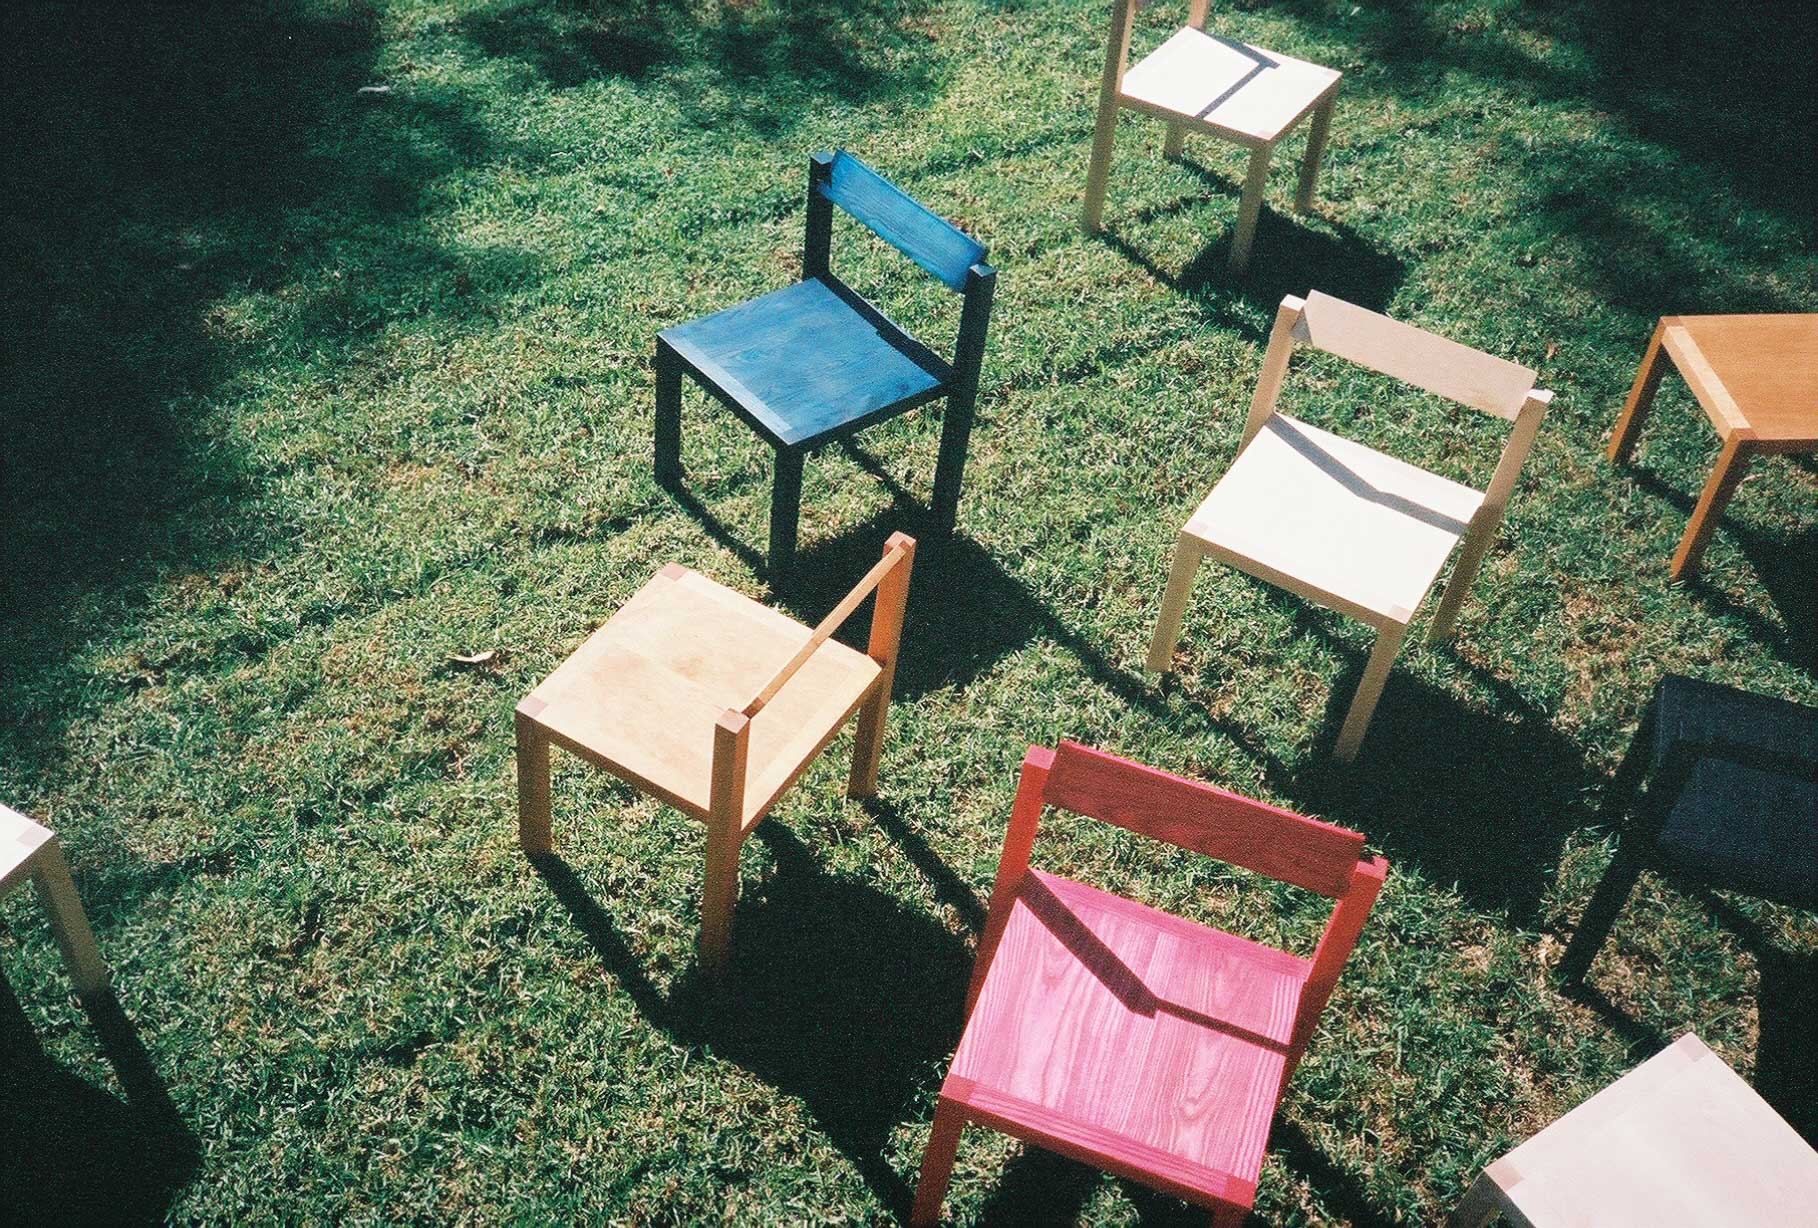 Anything Chairs in different finishes arranged in the grass